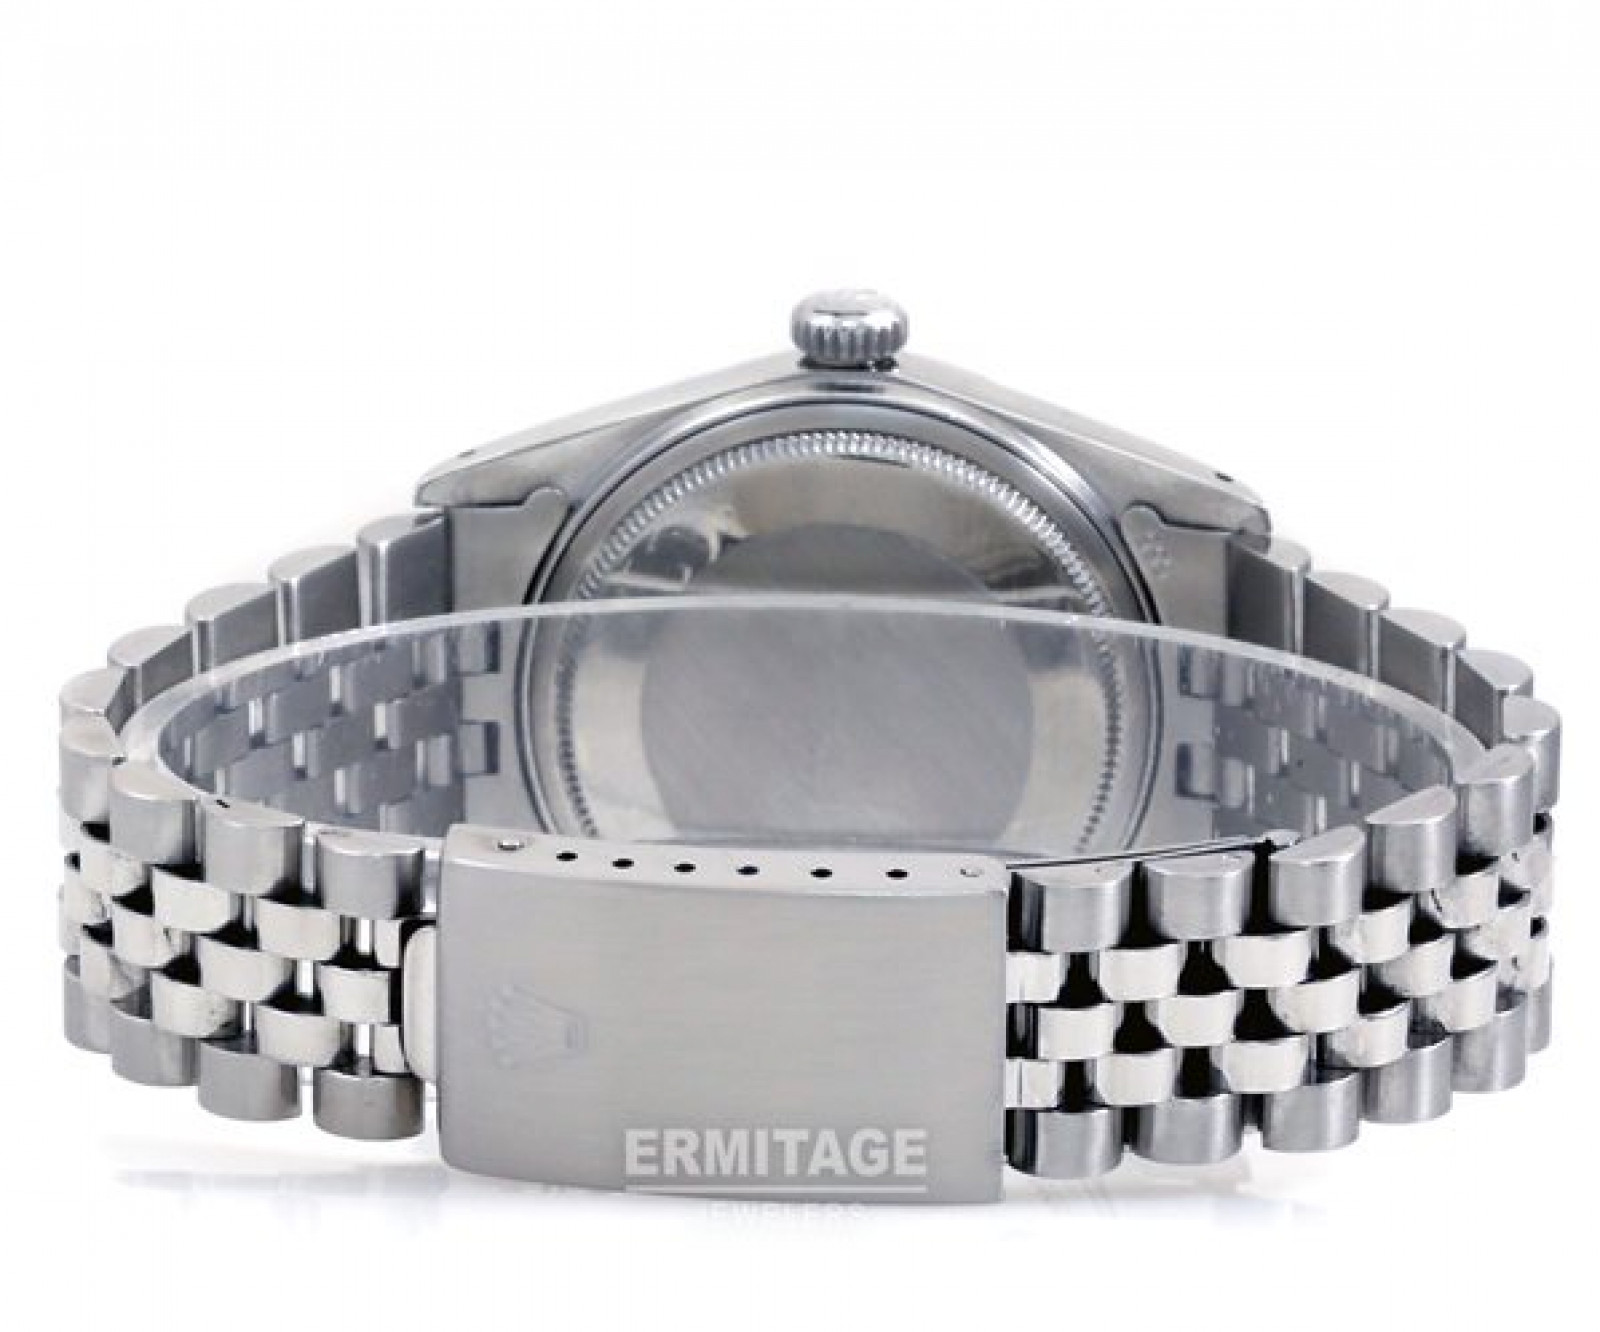 Datejust Steel With Black Dial | Ermitage